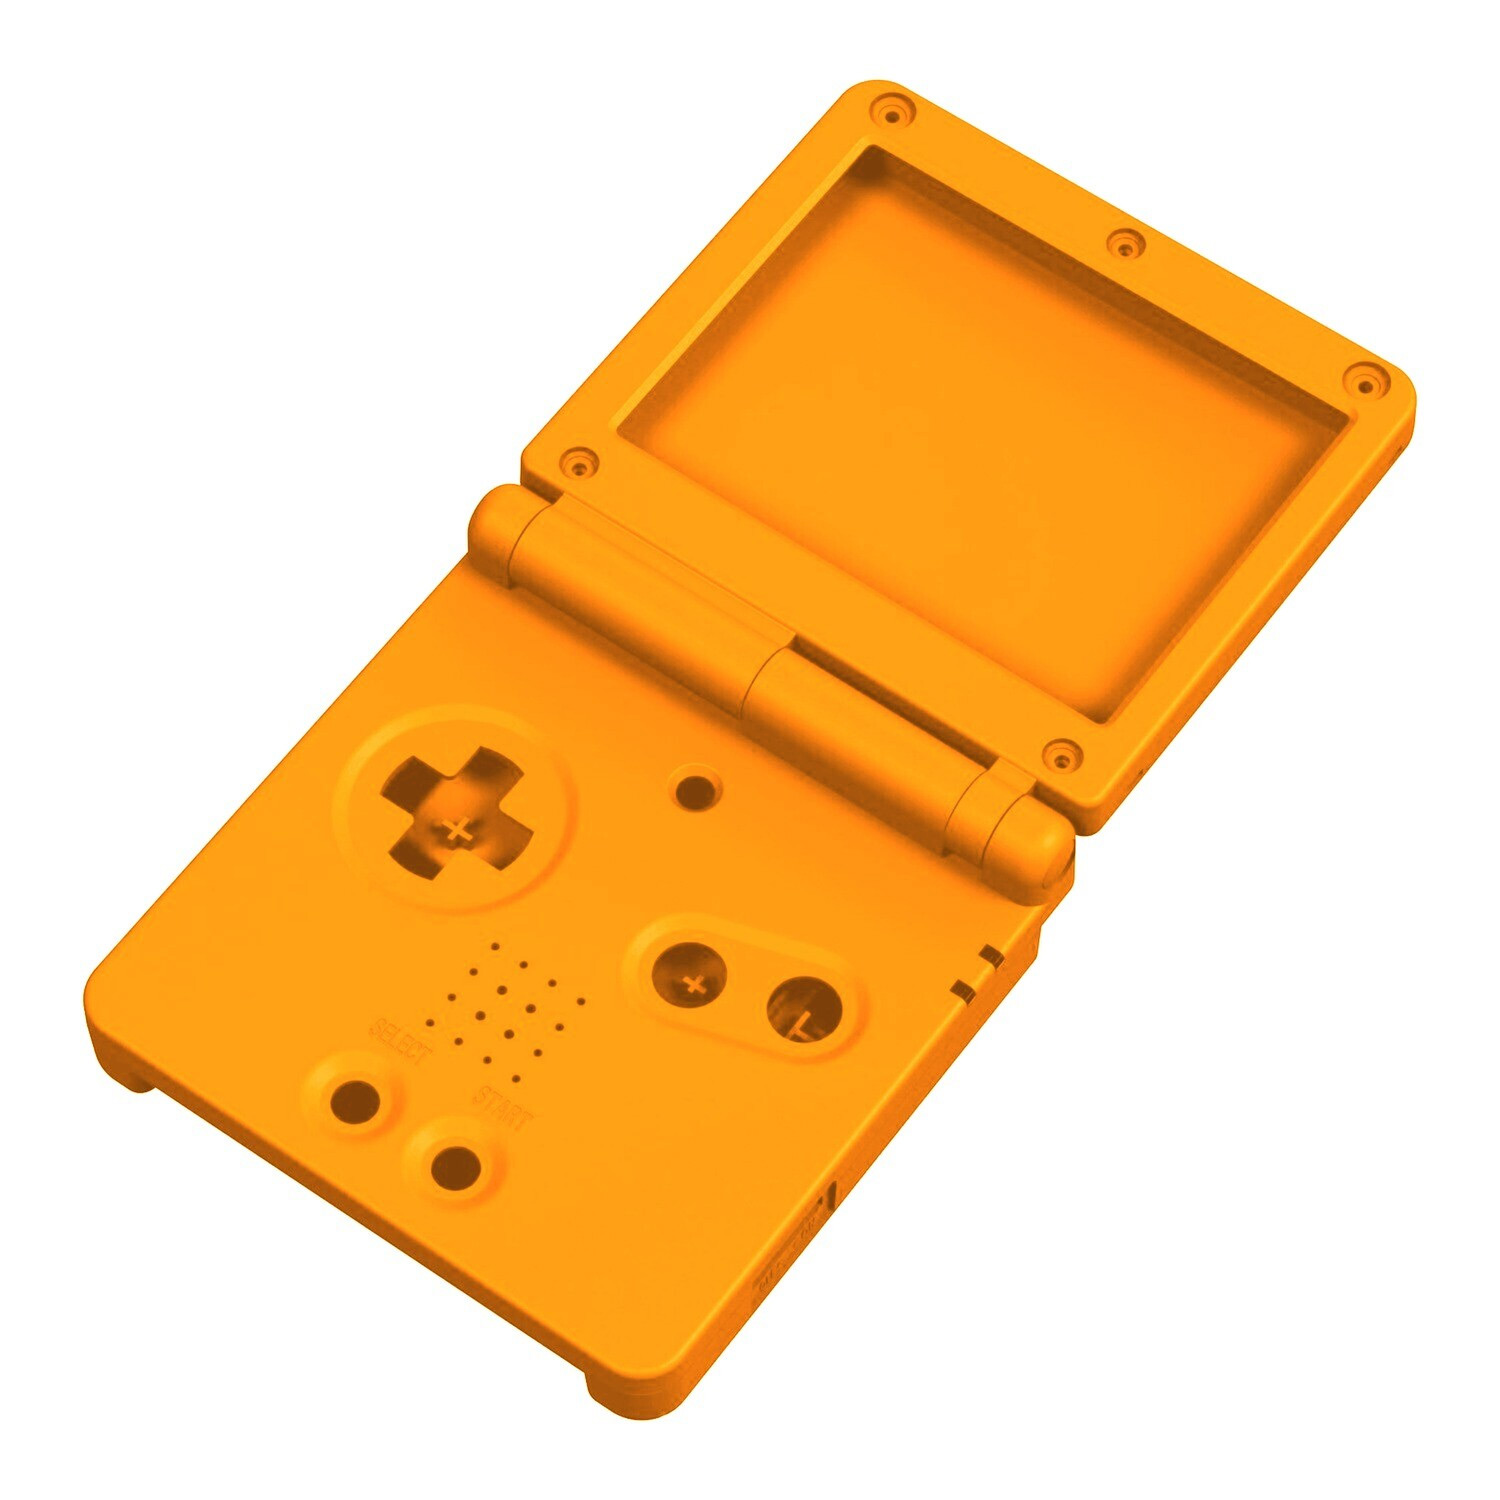  New Housing Shell Case Replacement, for Nintendo Game Boy  Advance GBA Console, for Pokemon Edition Upper Yellow & Bottom Blue With  Glass Protector Screen / Buttons / Screws Full Set 